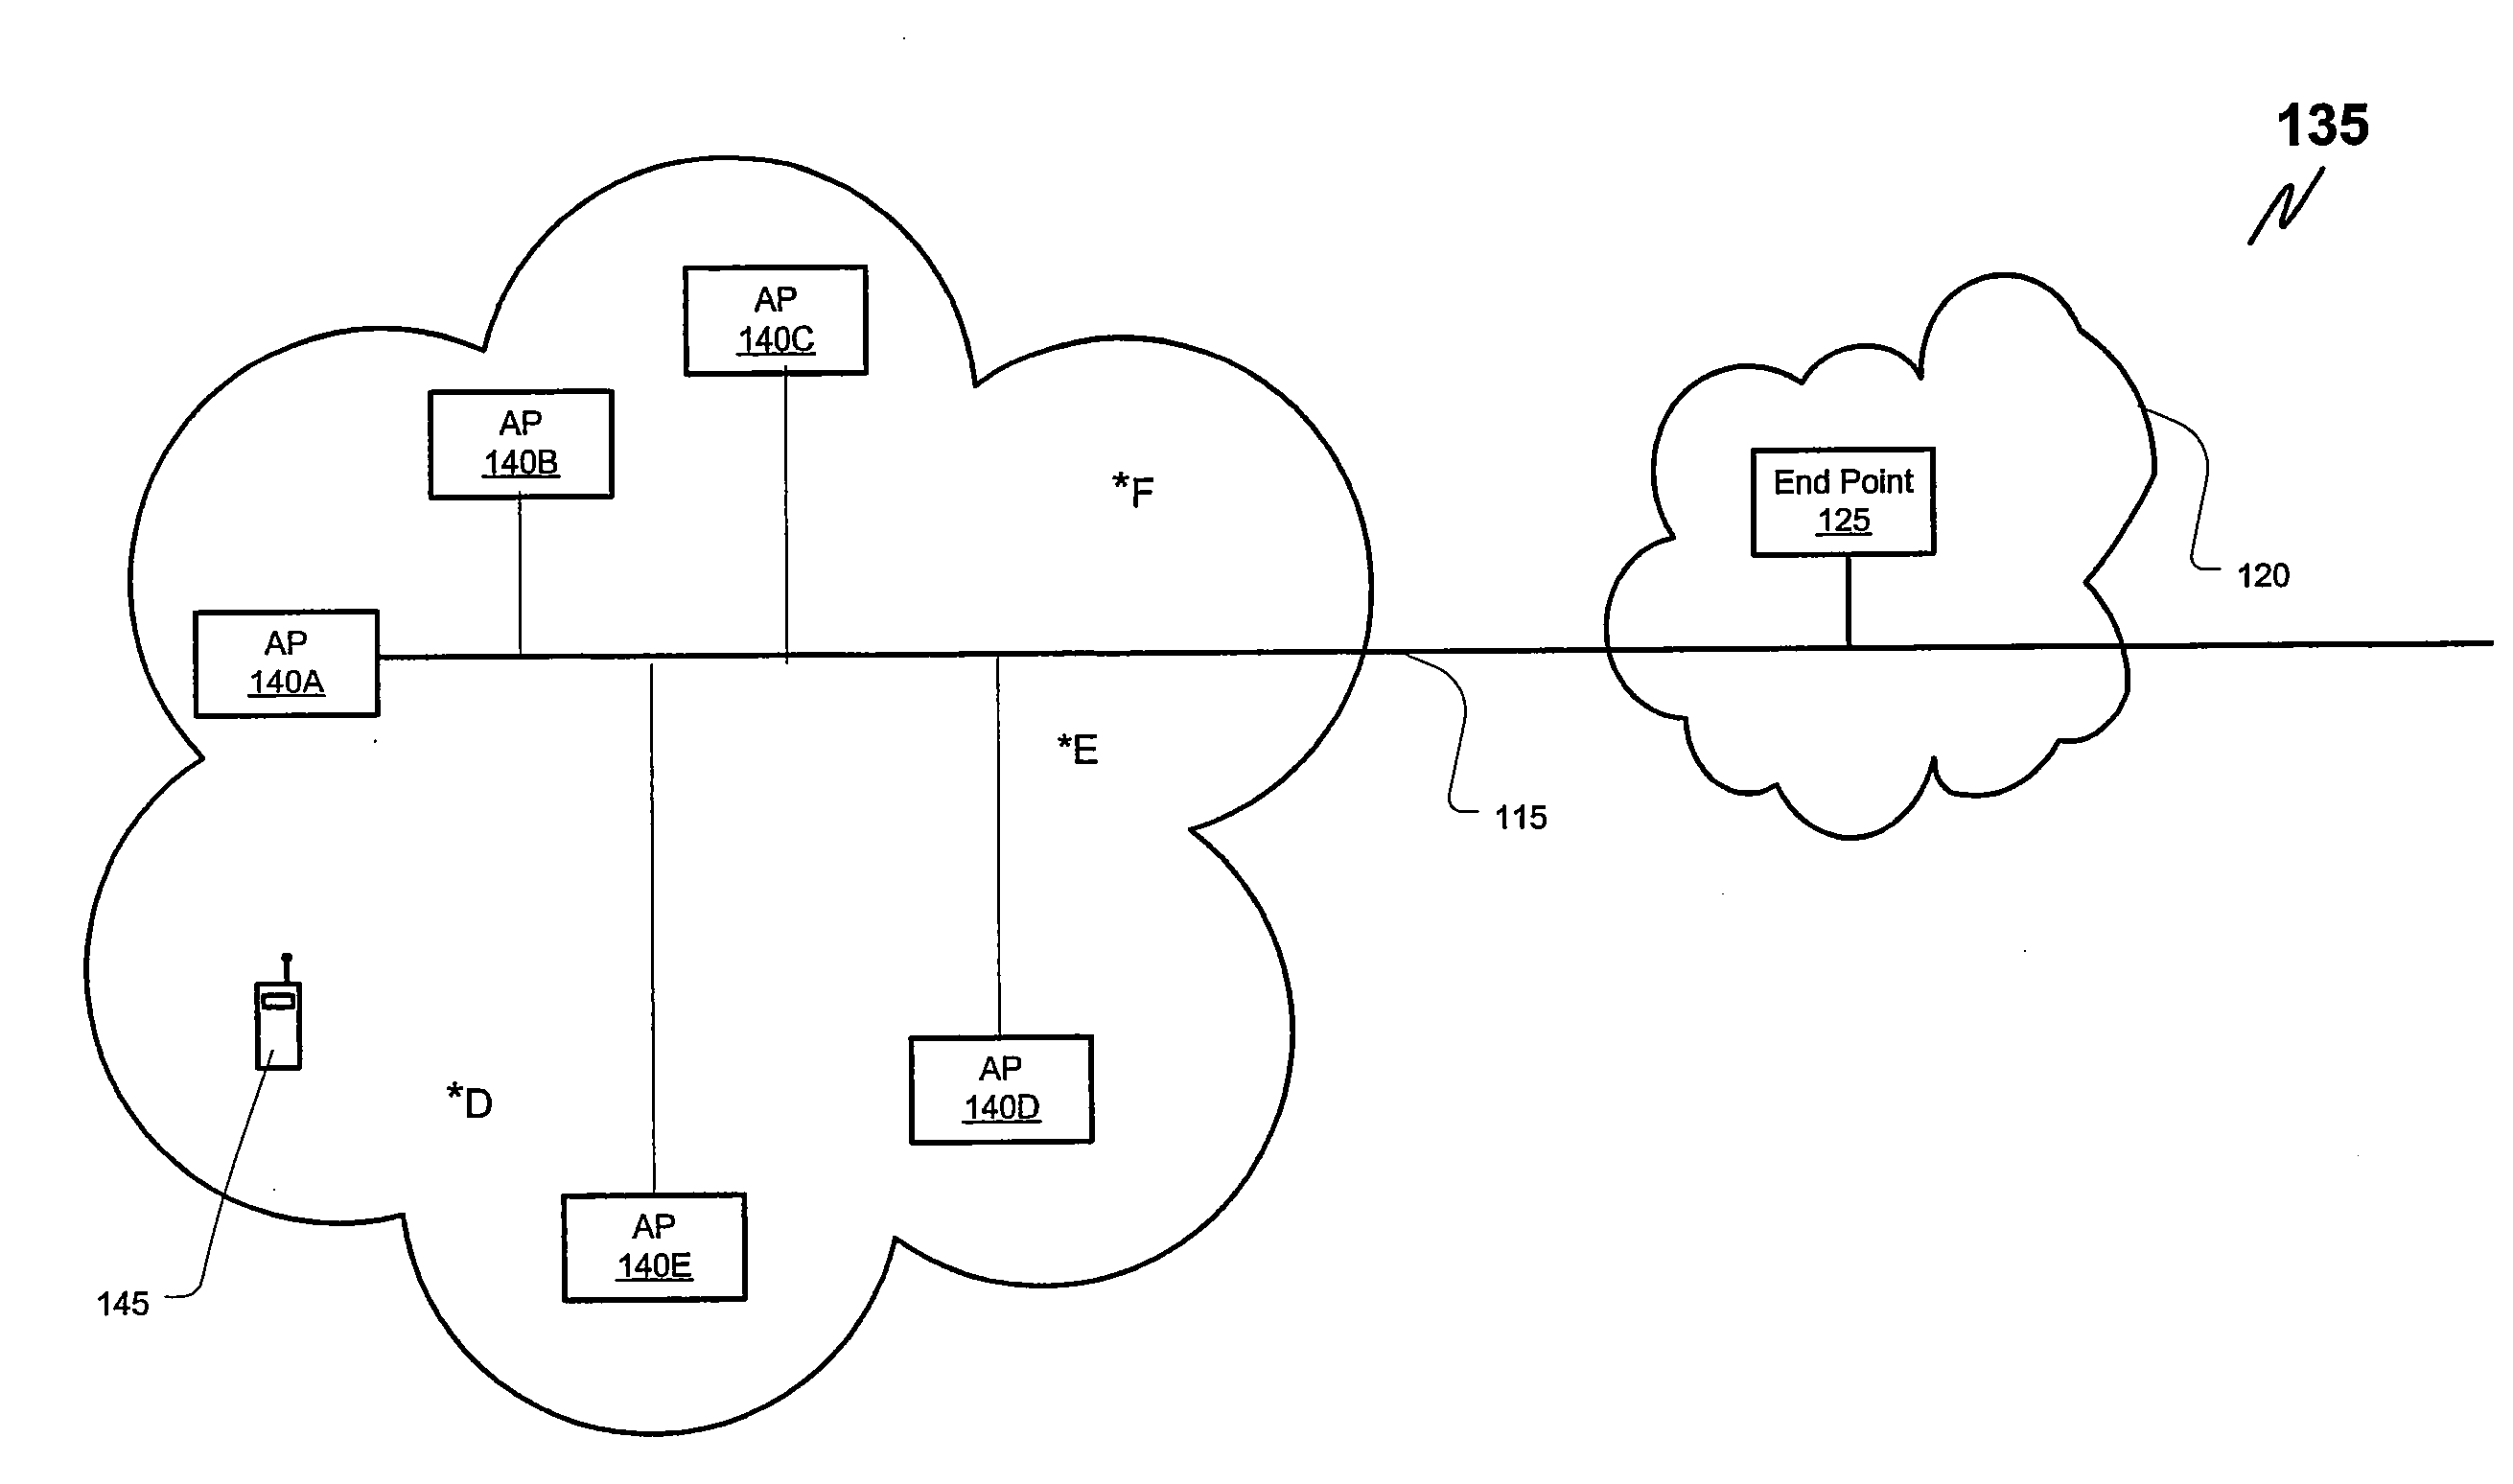 Method and apparatus for distributing data to a mobile device using plural access points